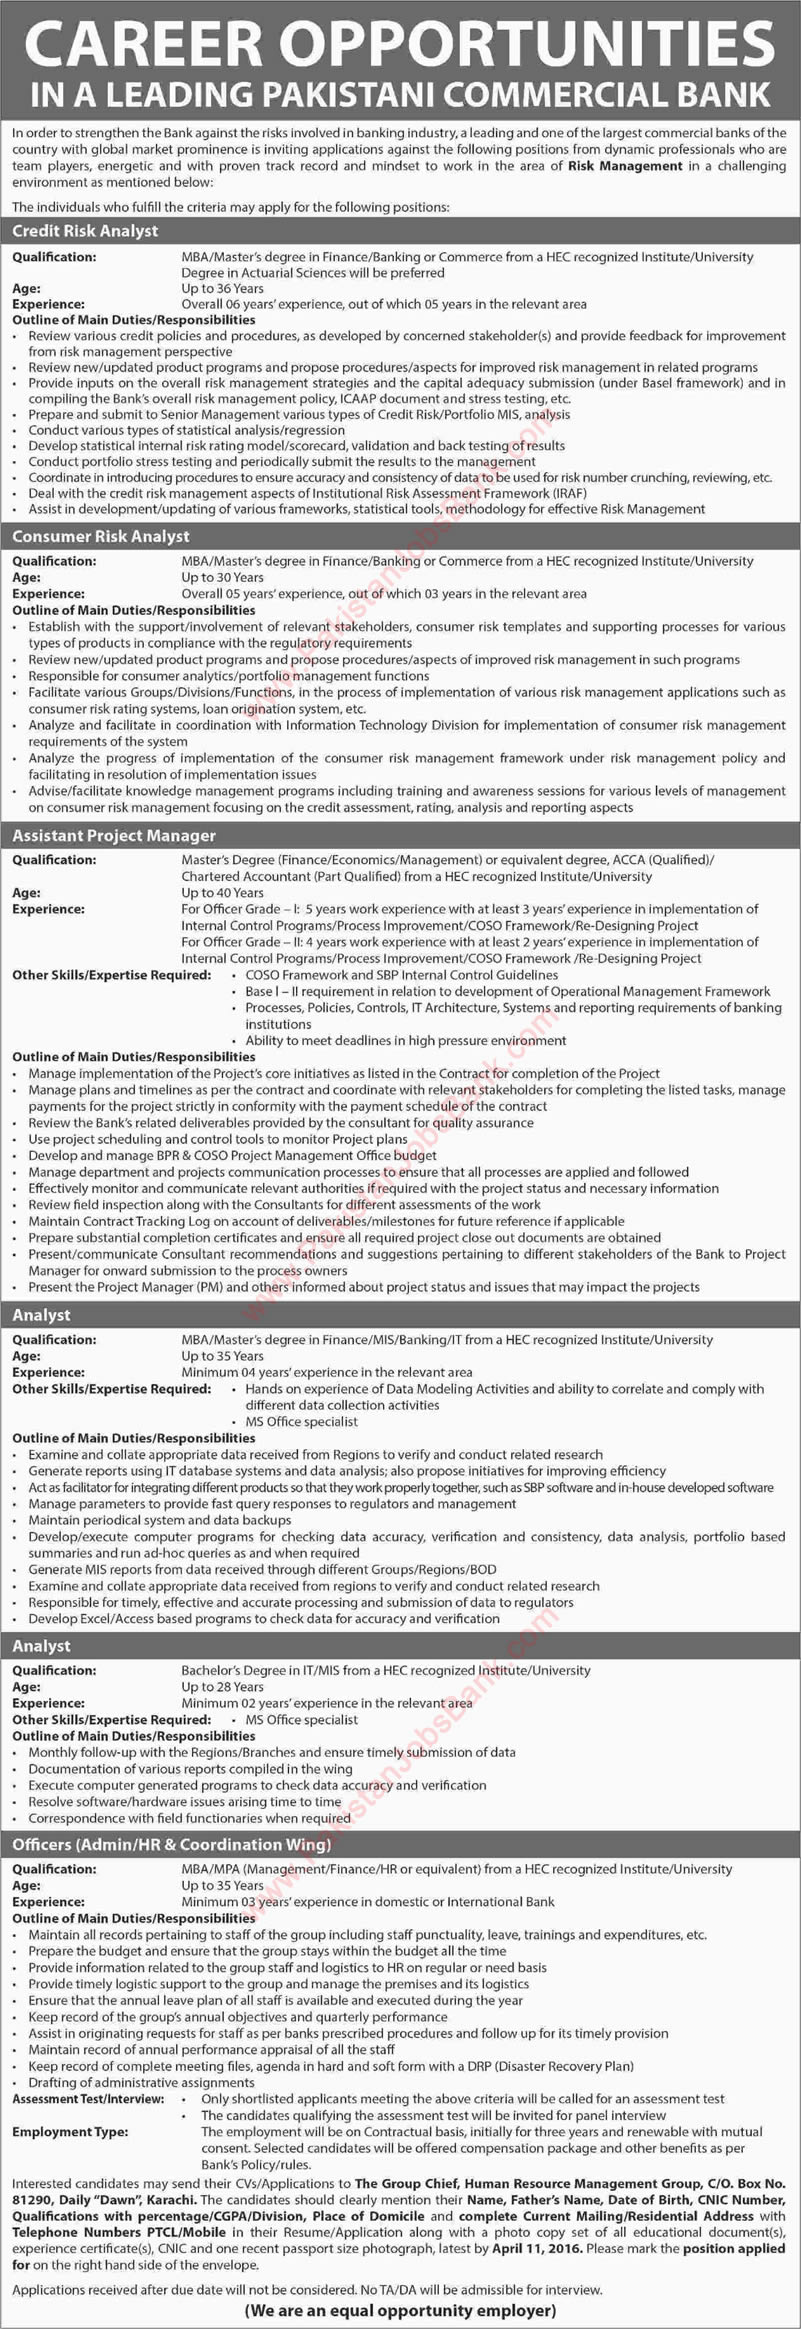 Bank Jobs in Karachi March 2016 April Analysts, Officers & Project Managers Latest / New